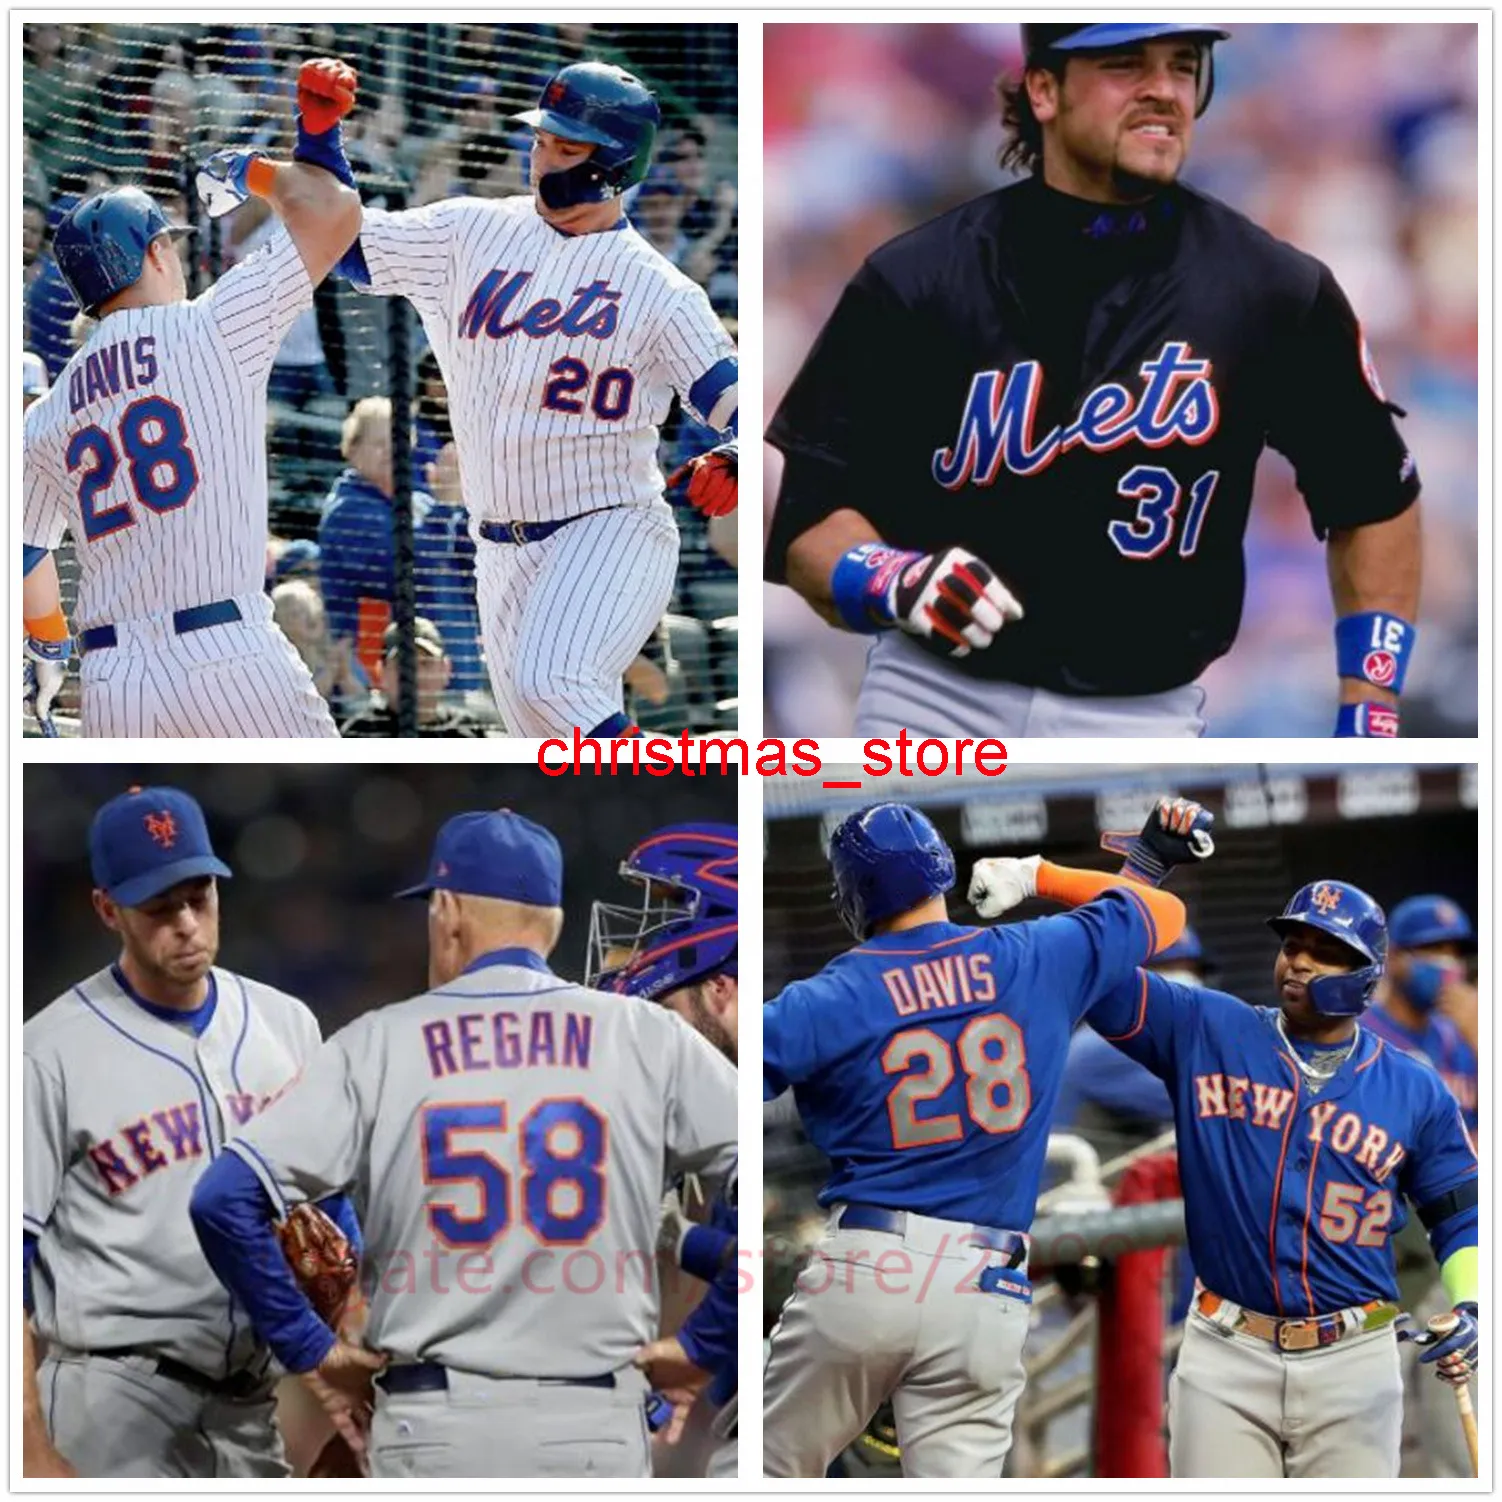 12 Francisco Lindor Jersey 2021 Personnalisé Jacob deGrom Pete Alonso Mike Piazza Dwight Gooden Keith Hernandez Darryl Strawberry York